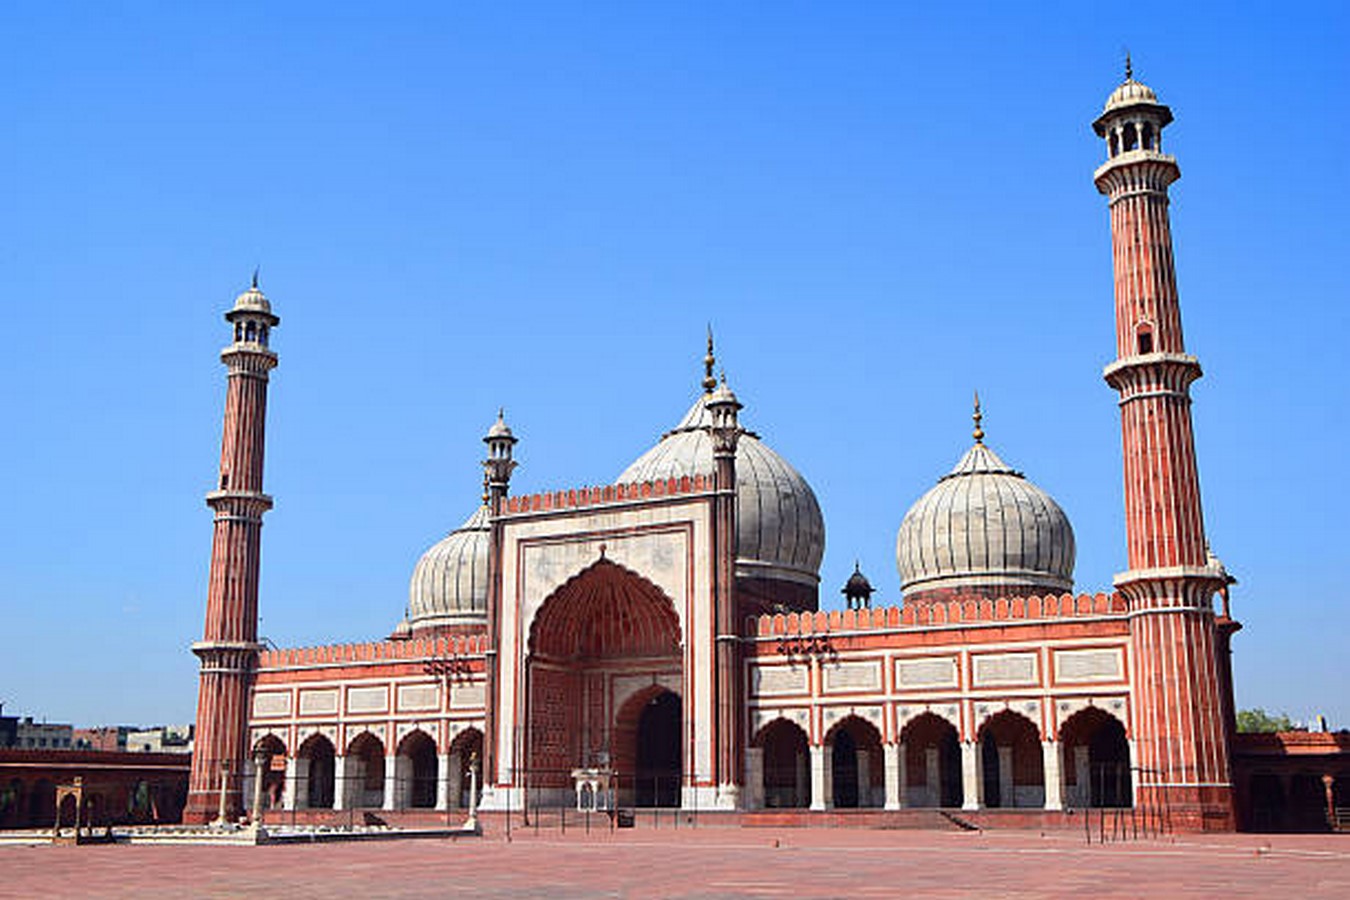 10 Buildings That Shaped Mughal Architecture in India - Sheet11